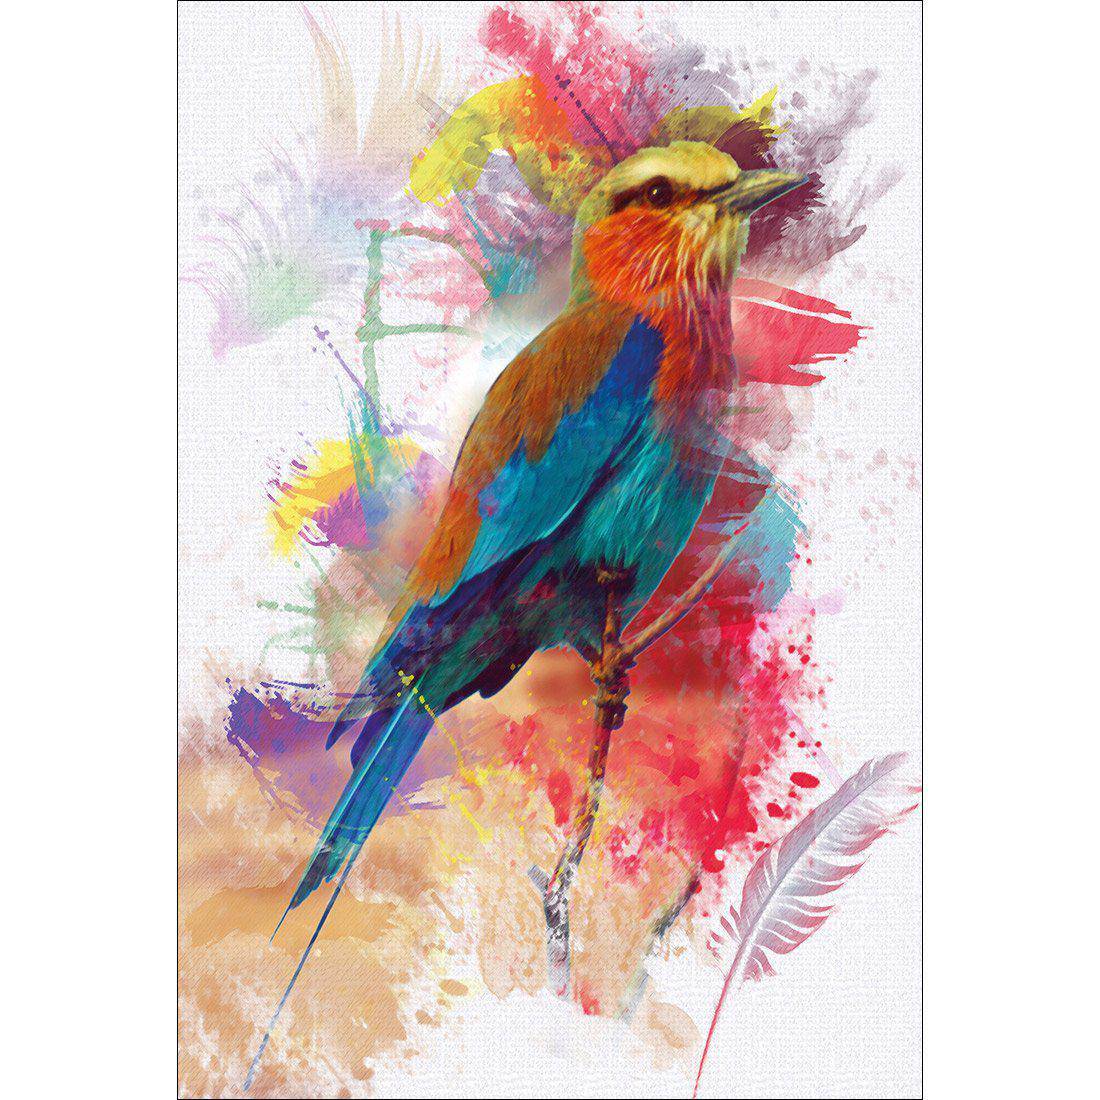 Painted Bird And Feathers Canvas Art-Canvas-Wall Art Designs-45x30cm-Canvas - No Frame-Wall Art Designs